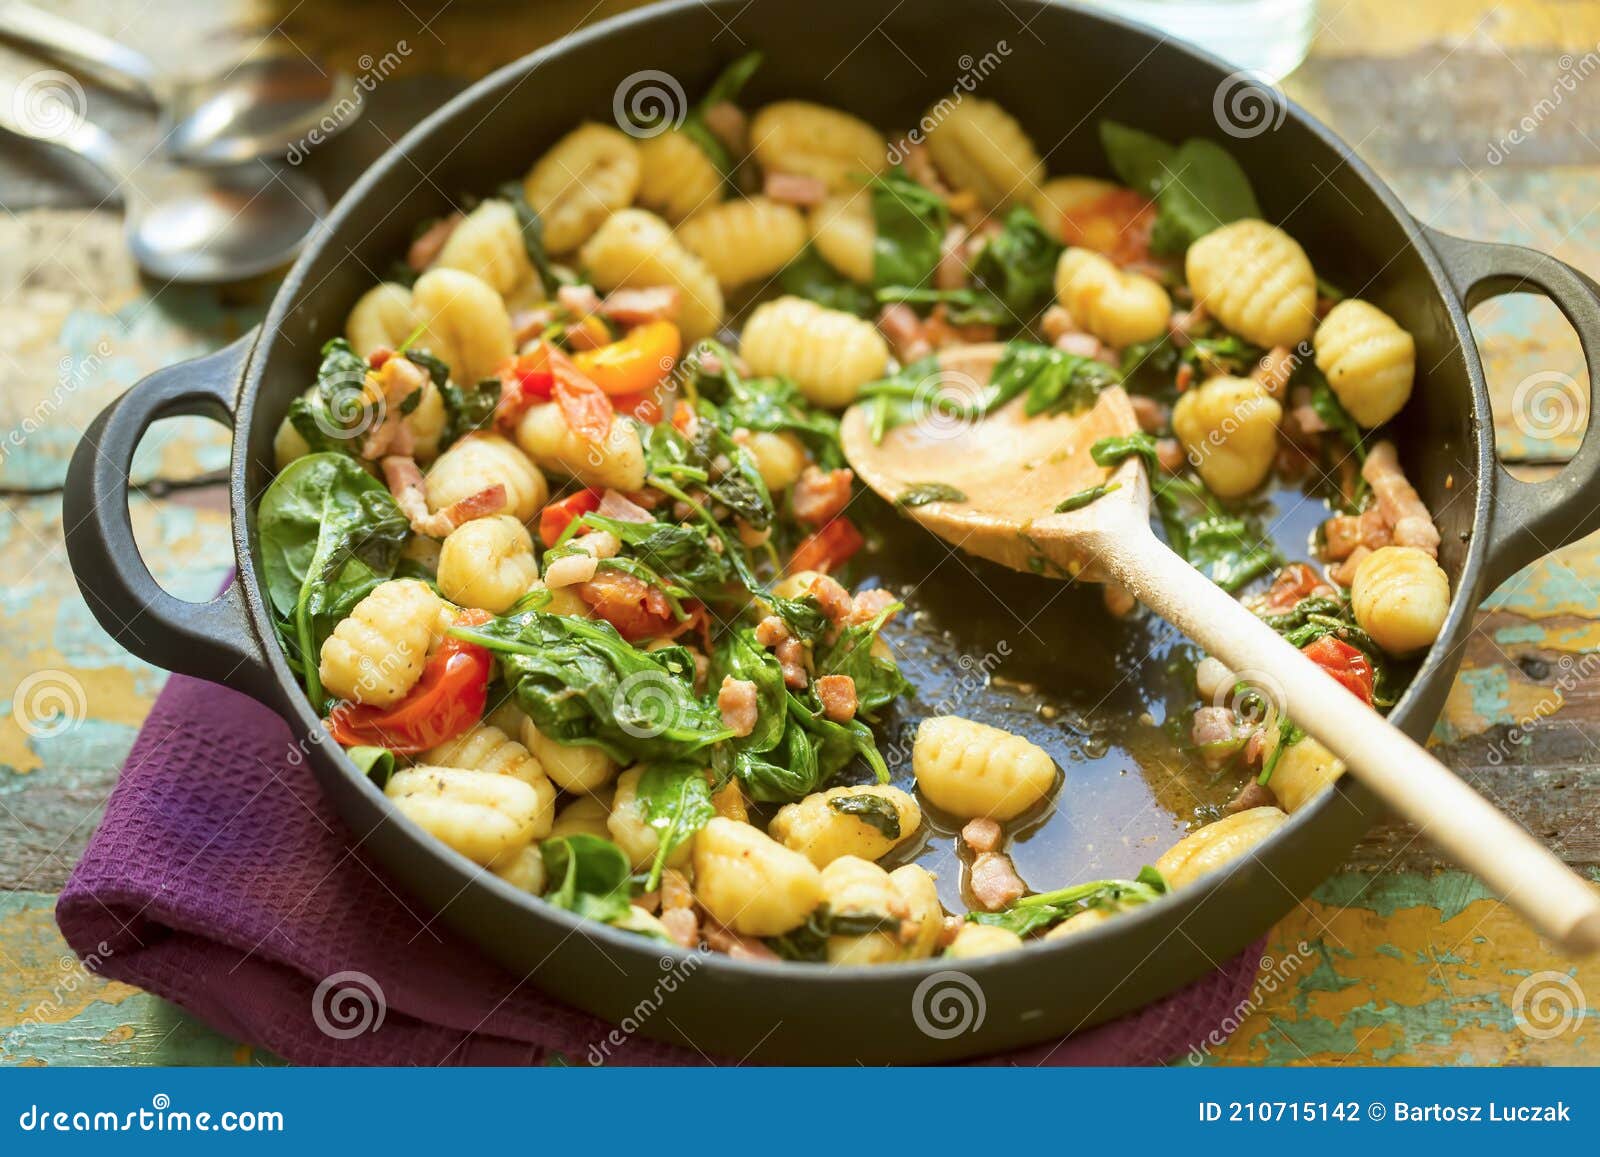 gnocchi with bacon, spinach & tomatoes